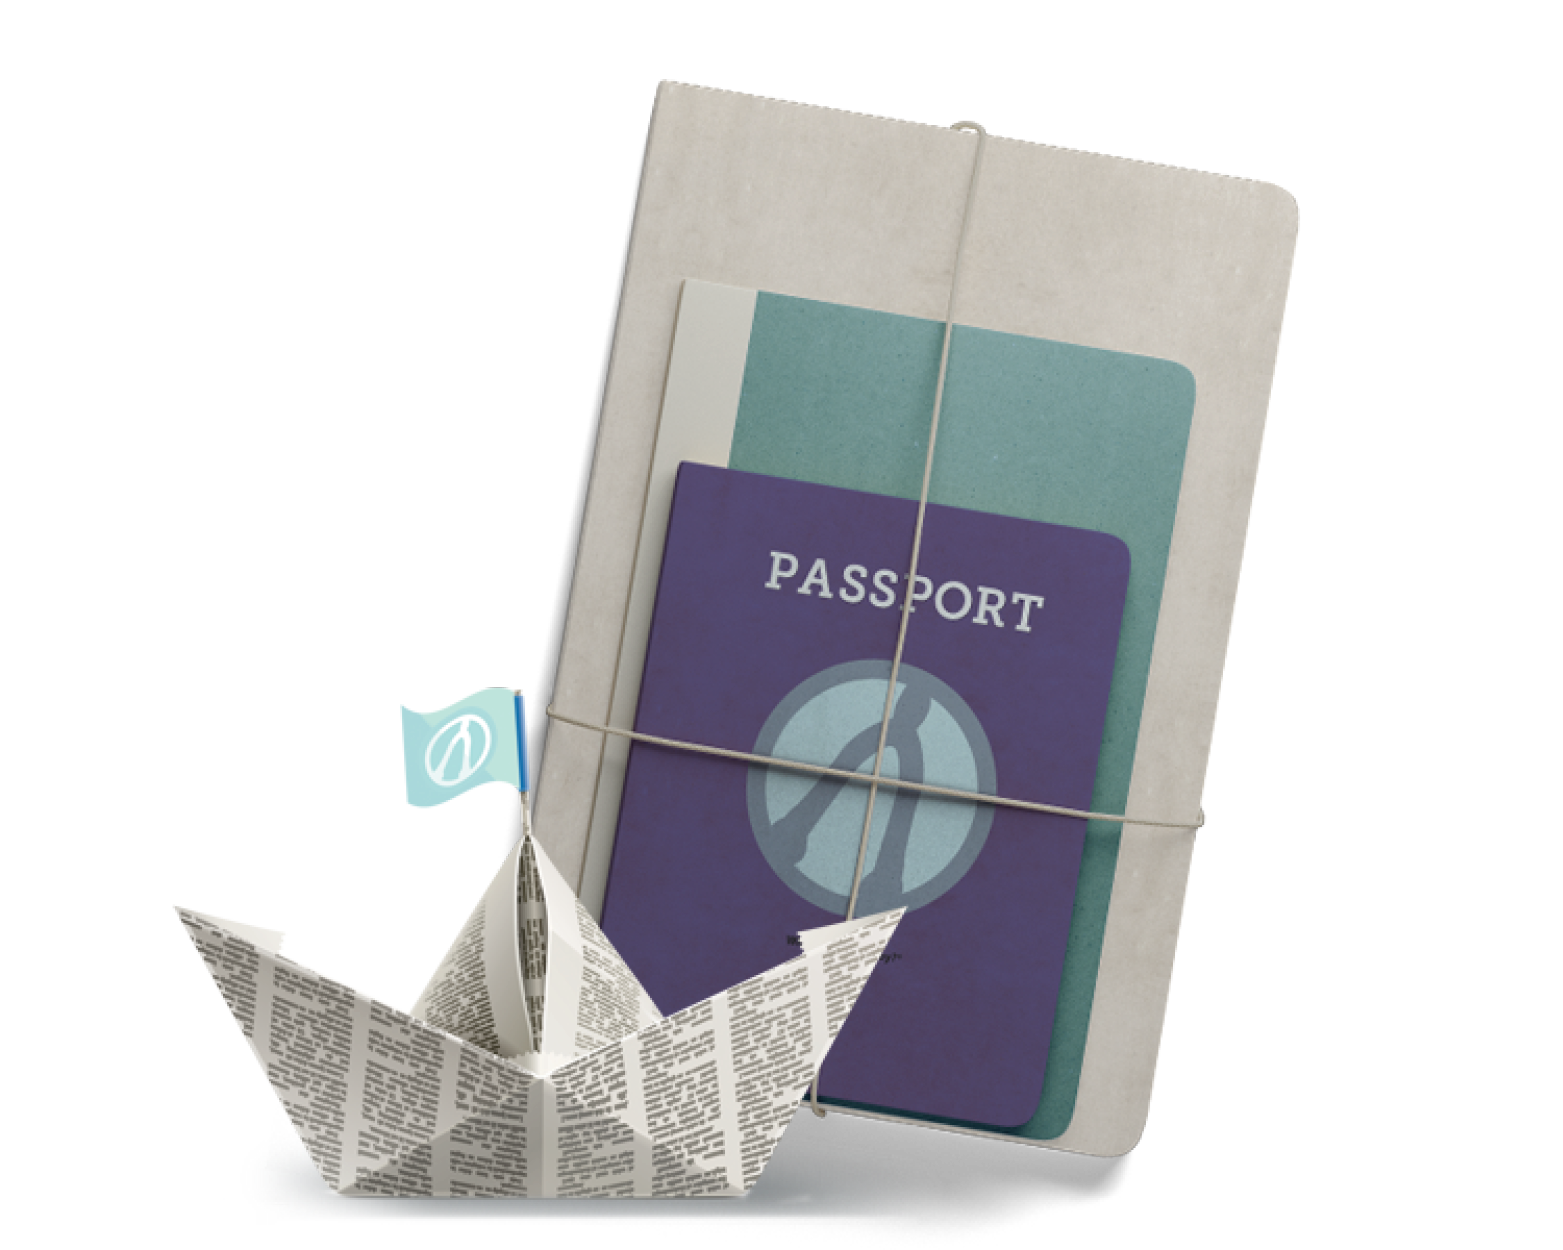 passport and journal bundle with paper boat